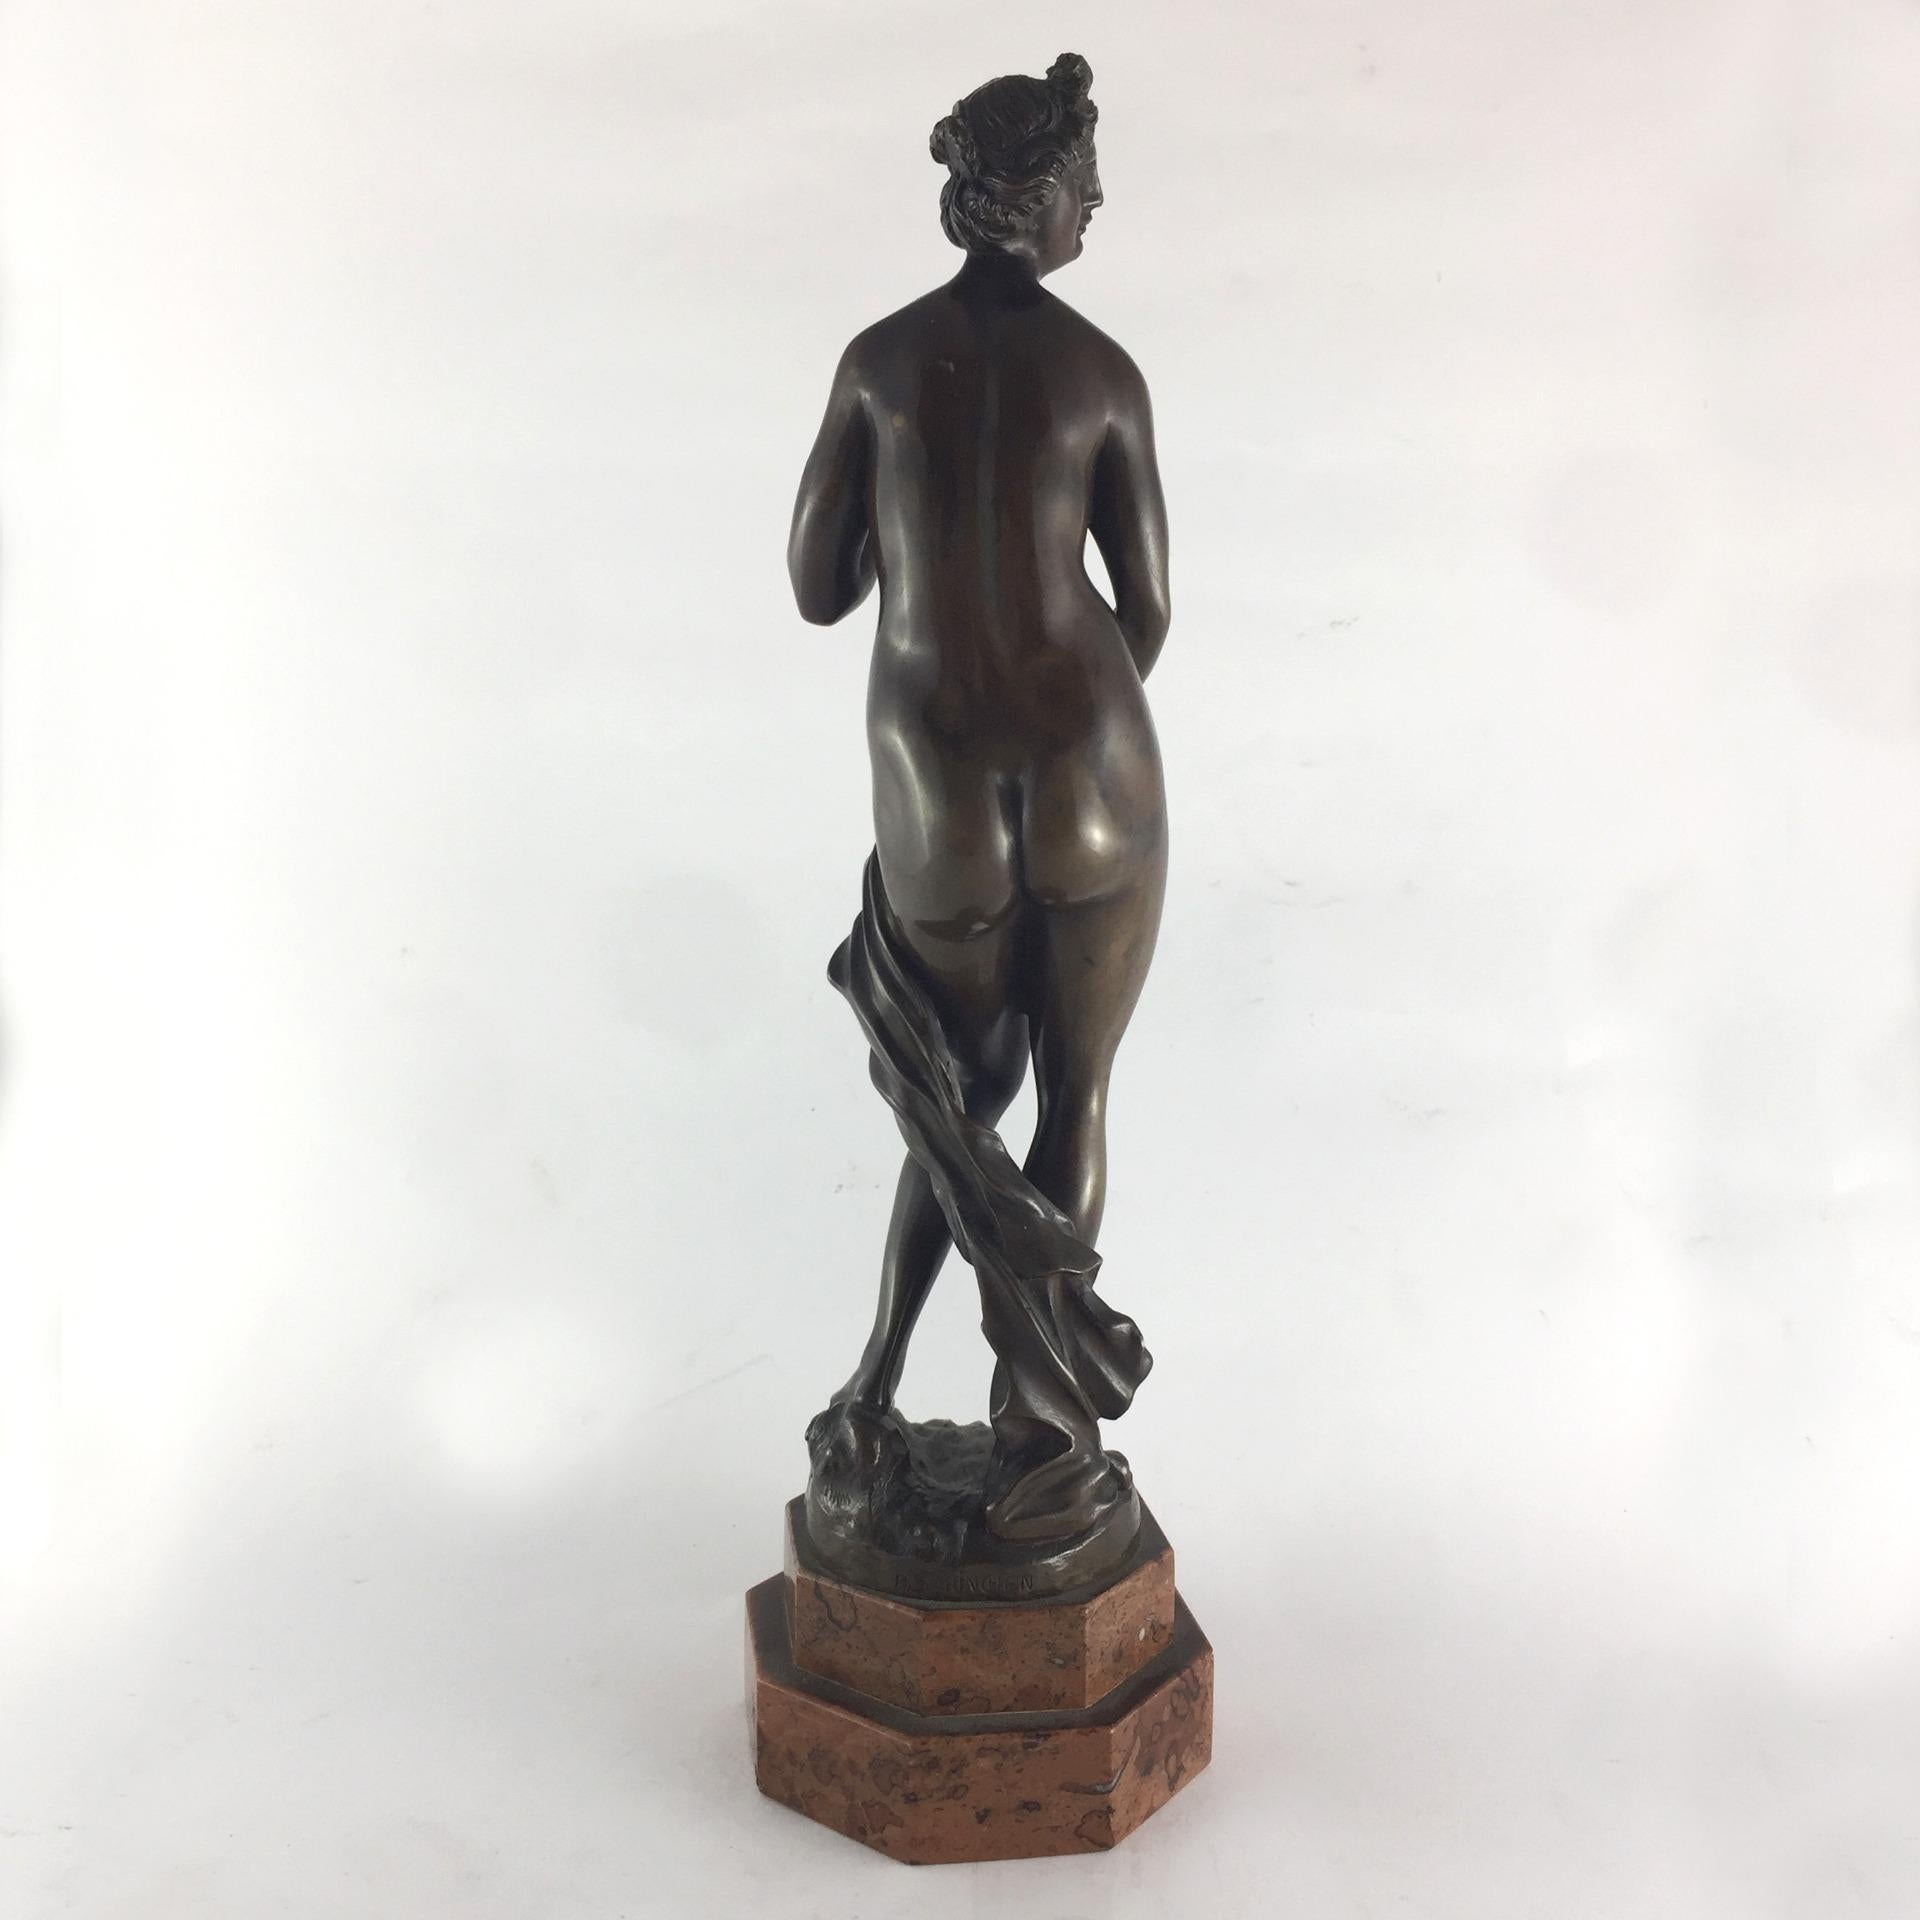 Lost wax cast Italian bronze sculpture, the subject reproduces 'Venus bather'. The base is made of Bardiglio red marble. Italian manufacture, early 19th century. Made by H.S. München

Size H 28 cm x W 8 cm x D 8 cm